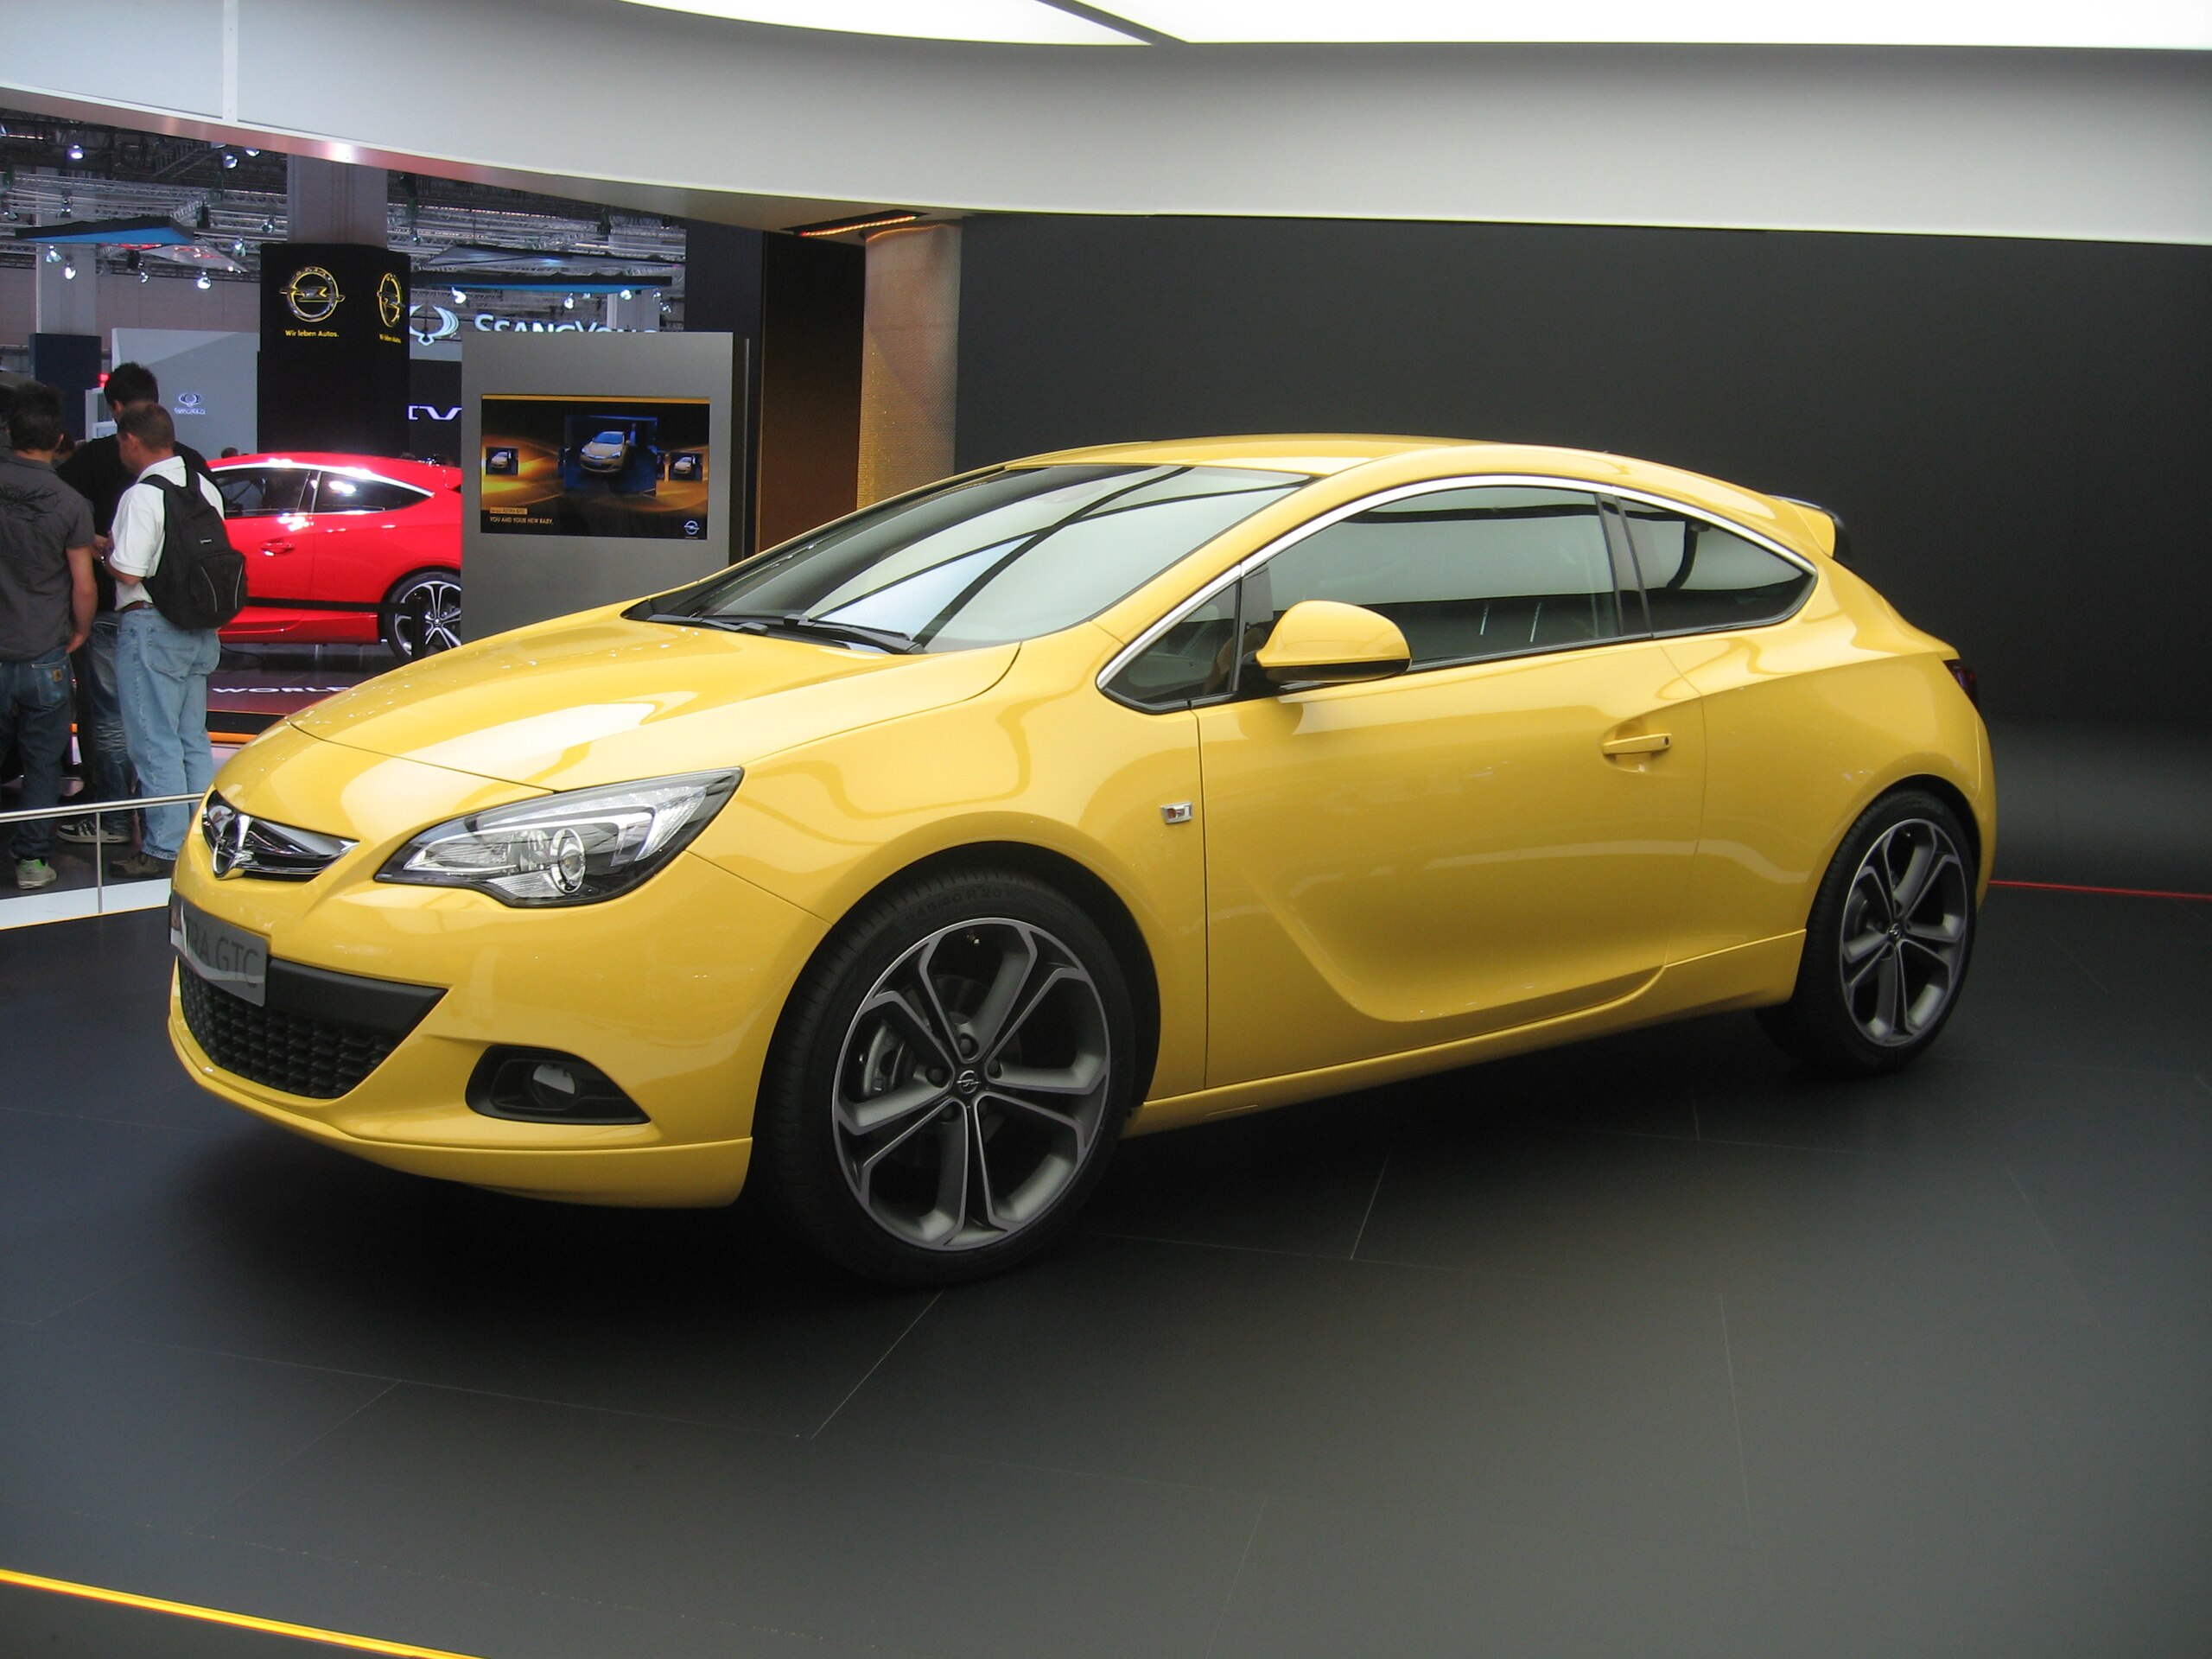 File:Opel Astra J GTC Front-view.JPG - Wikimedia Commons